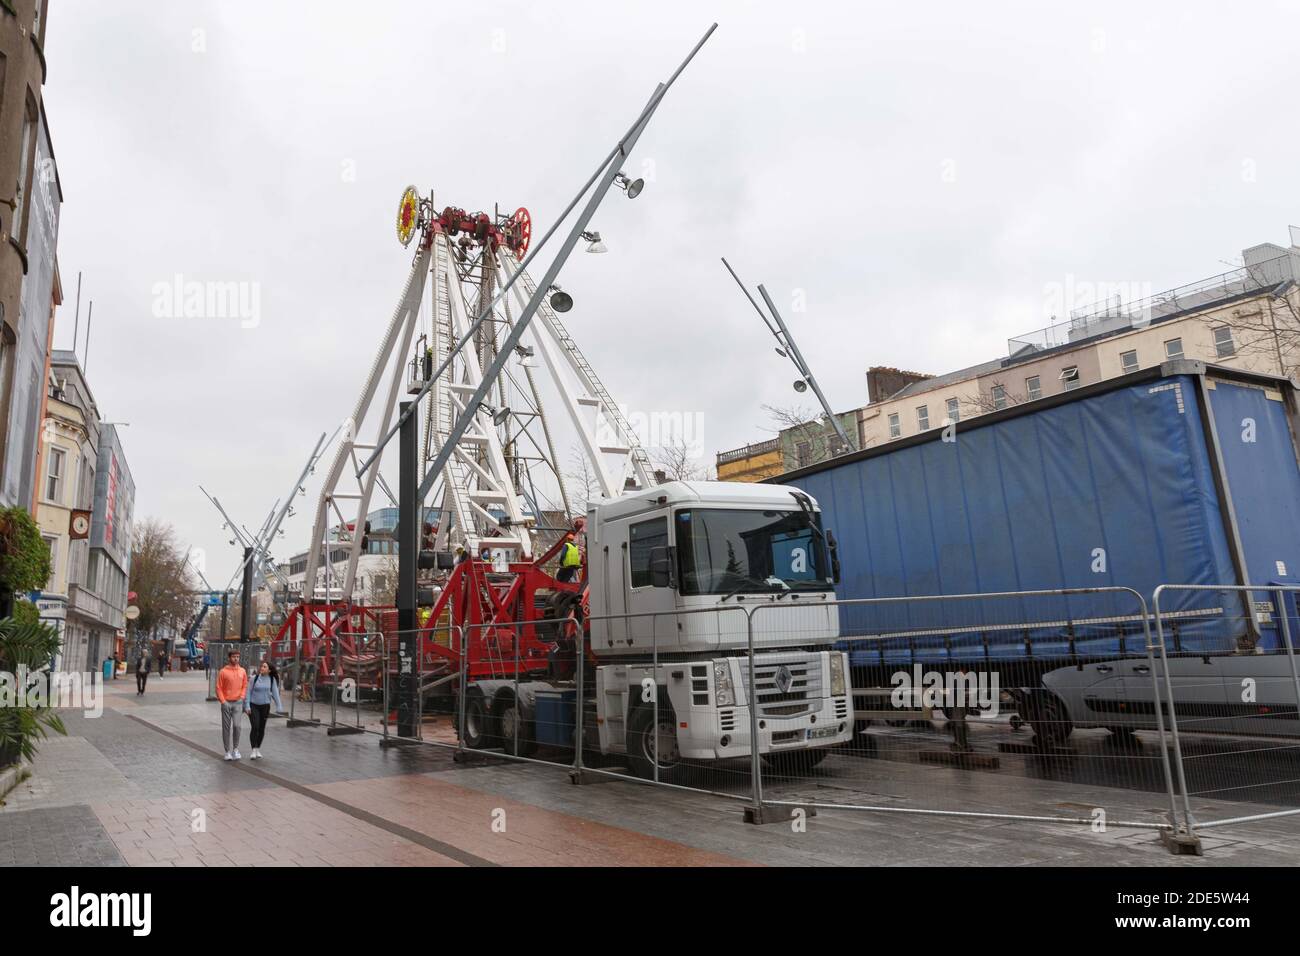 Cork, Ireland. 29th Nov, 2020. Glow Cork Ferris Wheel Under Construction, Cork City. Assembly of the Glow Cork Ferris Wheel has begun today on Grand Parade. The popular attraction marks the beginning of the festive season for many each yeah and draws large crowds to into the city centre to Credit: Damian Coleman/Alamy Live News Stock Photo